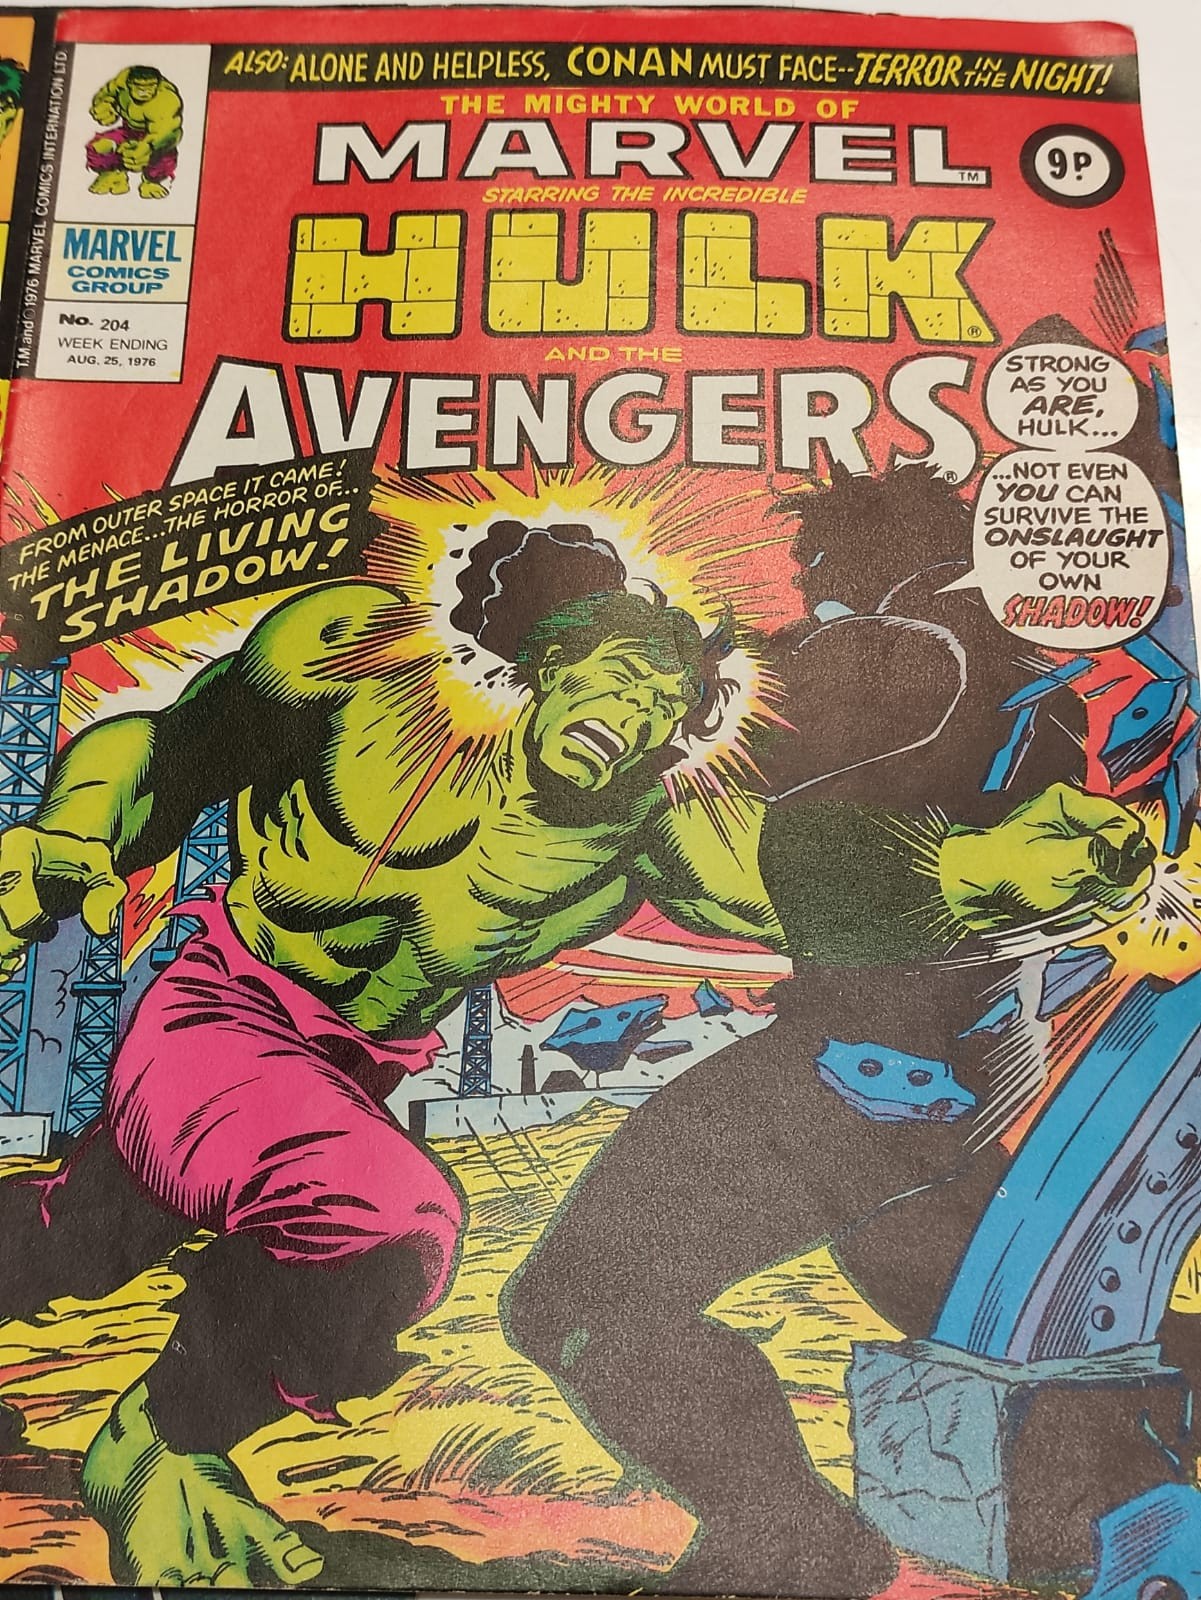 4 x Marvel comics. The Mighty World of Marvel Starring the Incredible Hulk. Dating from 1976 - 1978. - Image 6 of 6